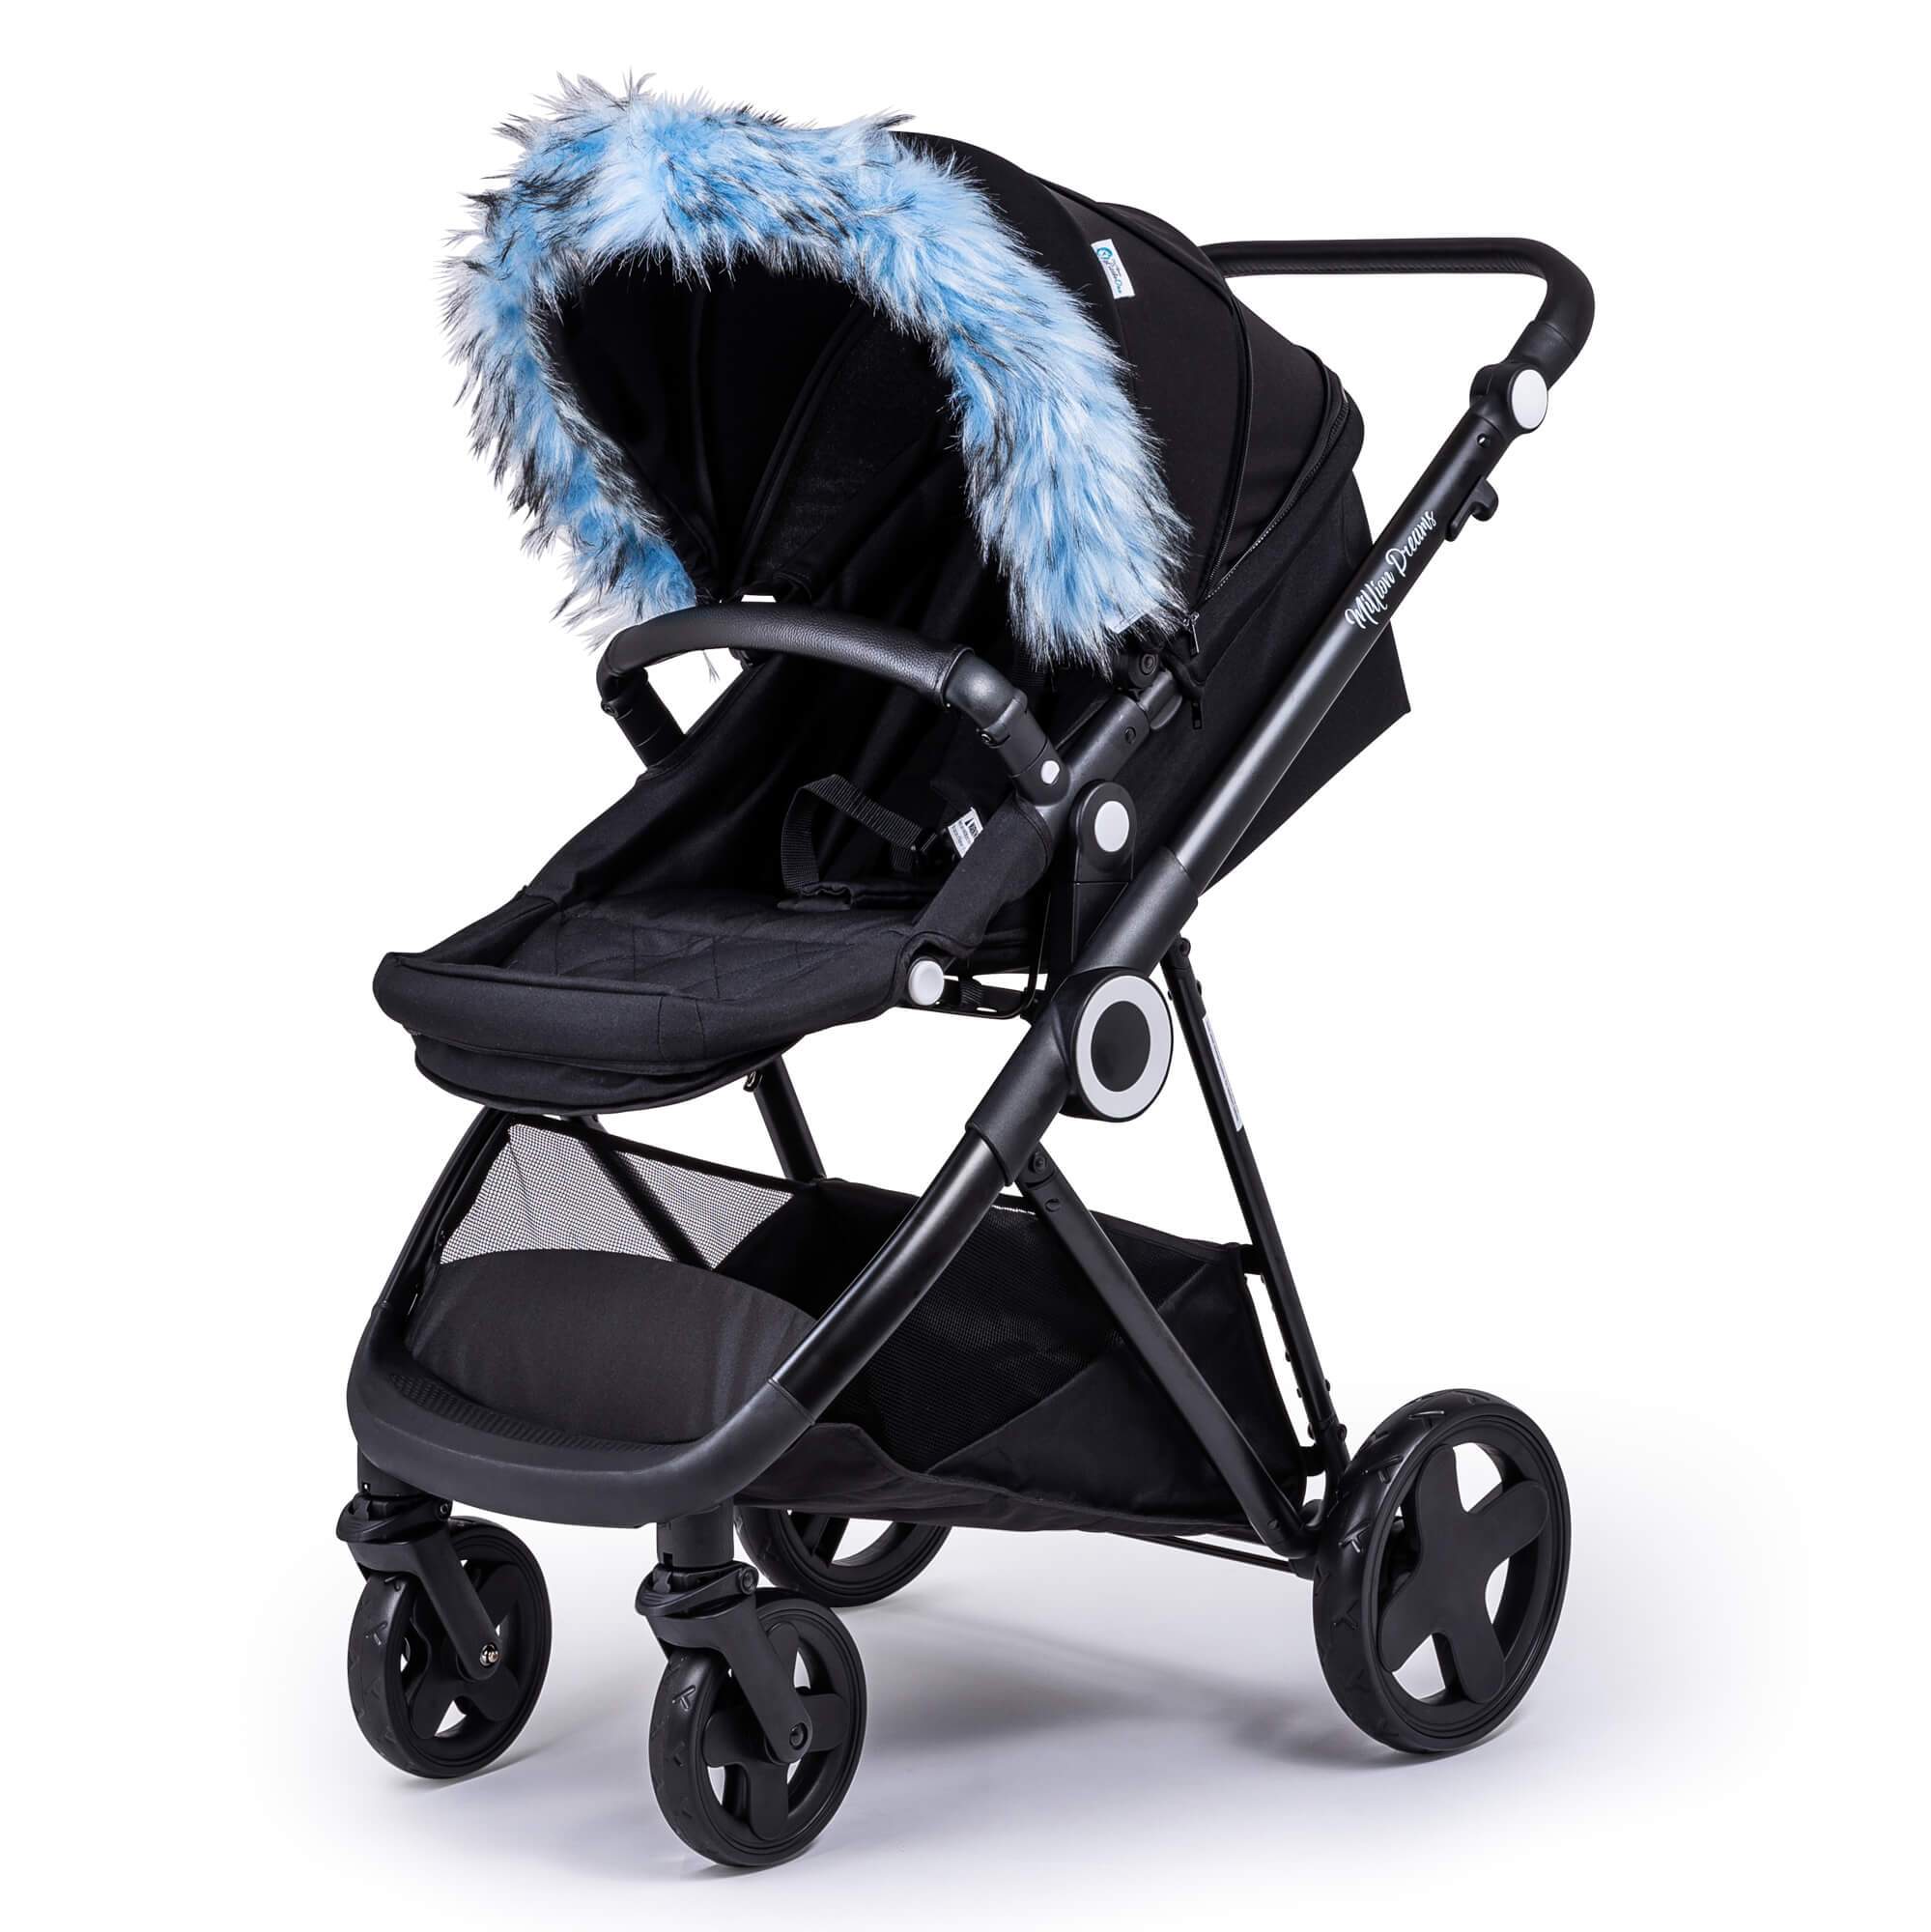 Pram Fur Hood Trim Attachment for Pushchair Compatible with BabyCare - Light Blue / Fits All Models | For Your Little One